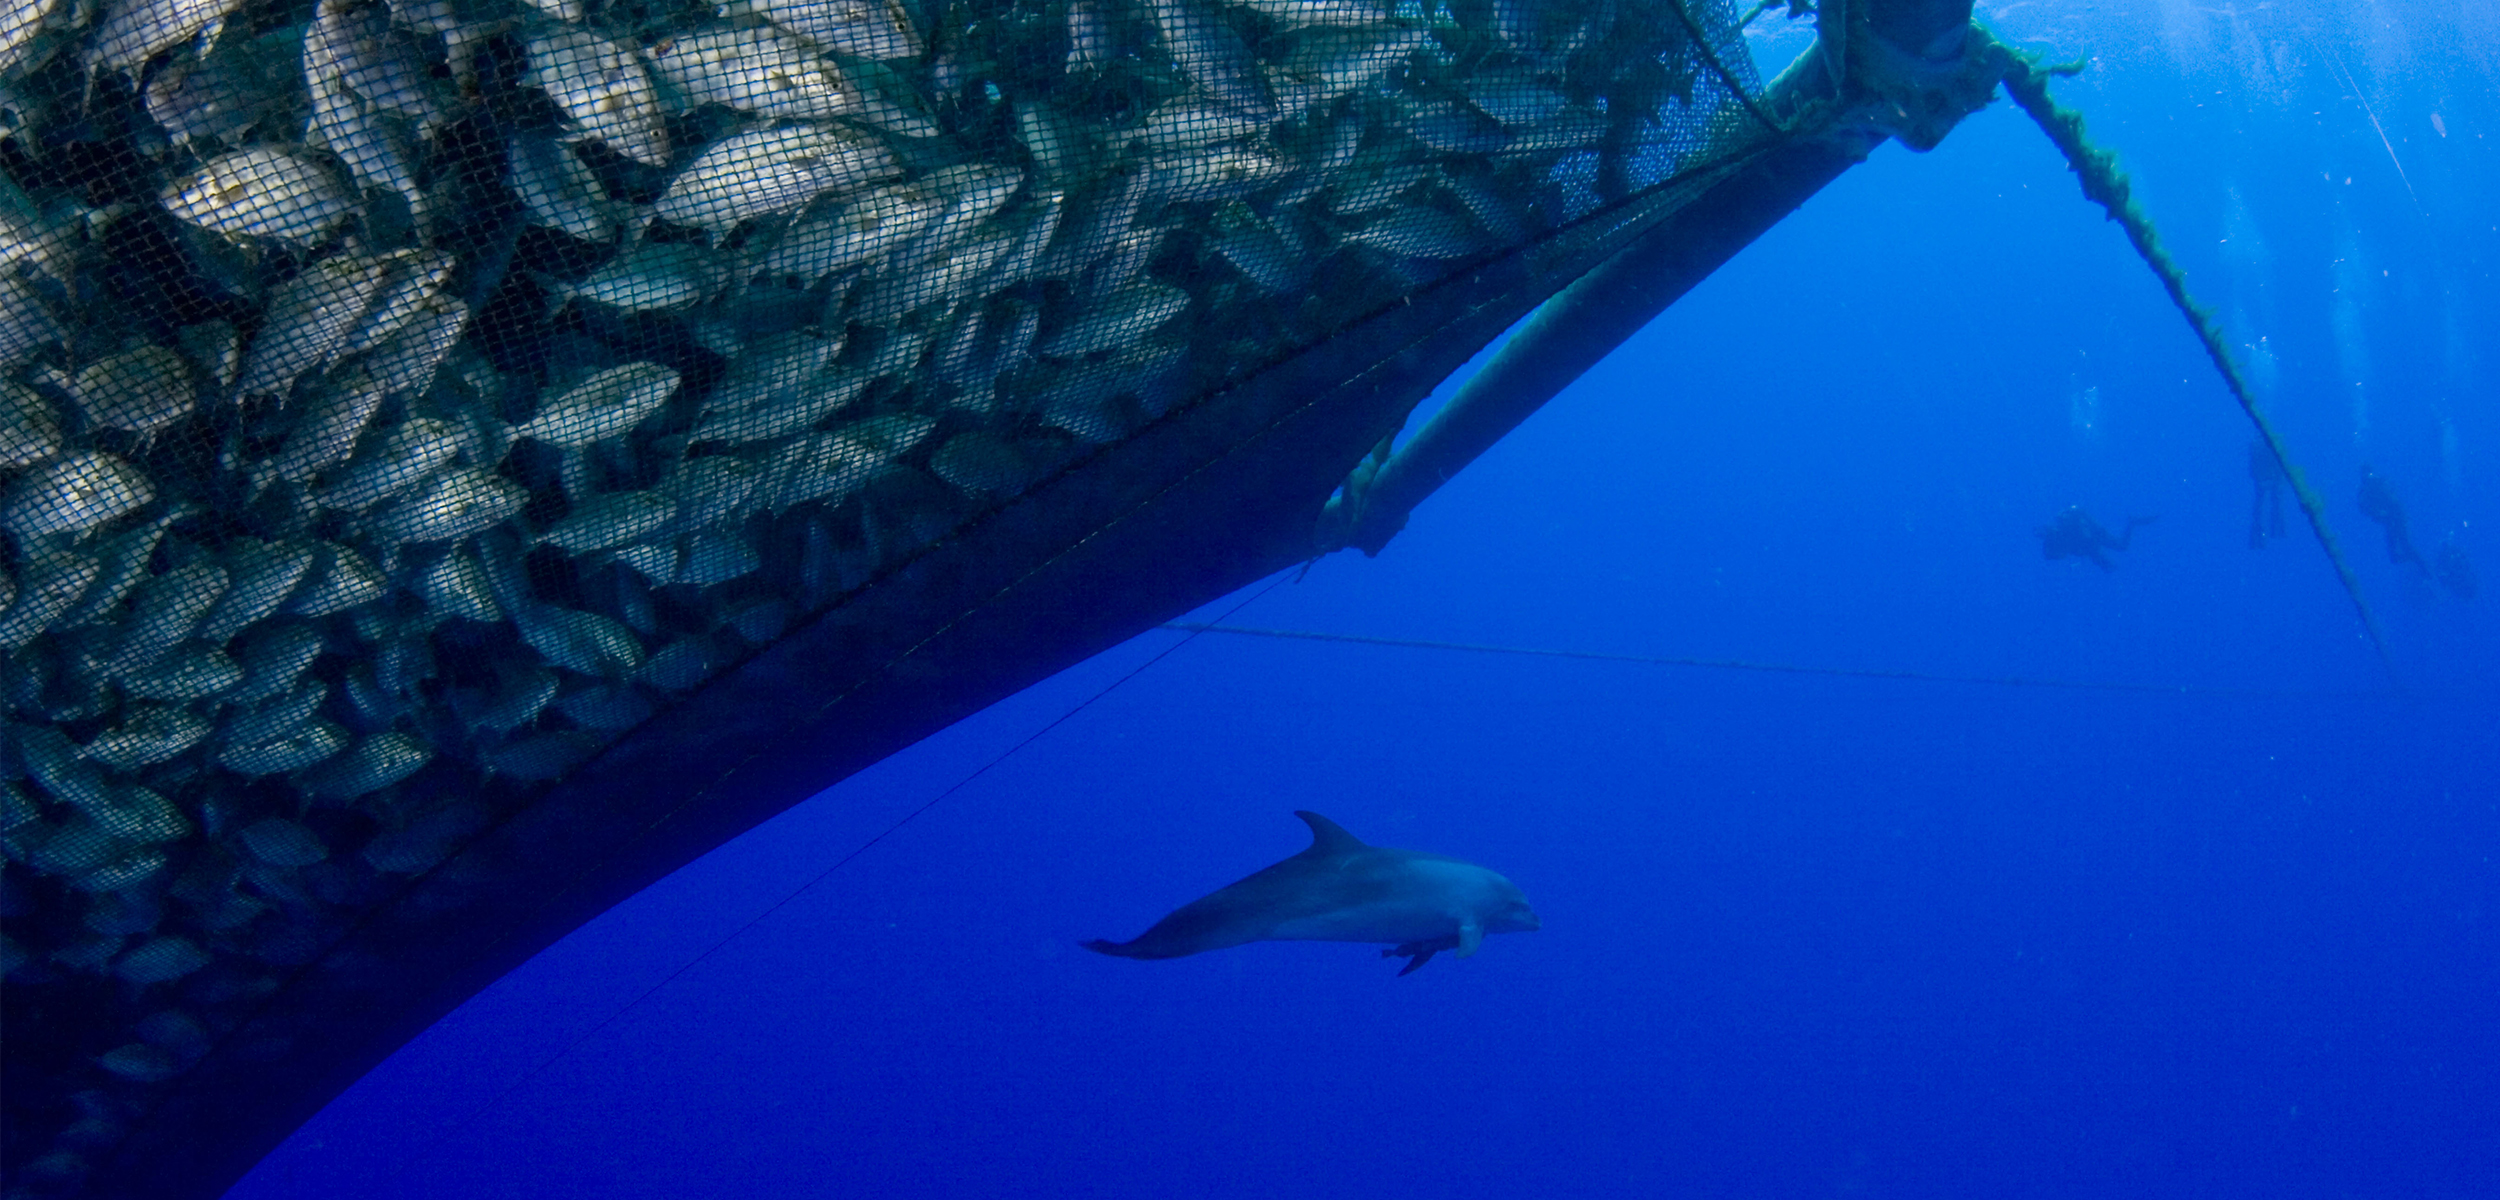 A single dolphin on the right side swims away from a net full of fish